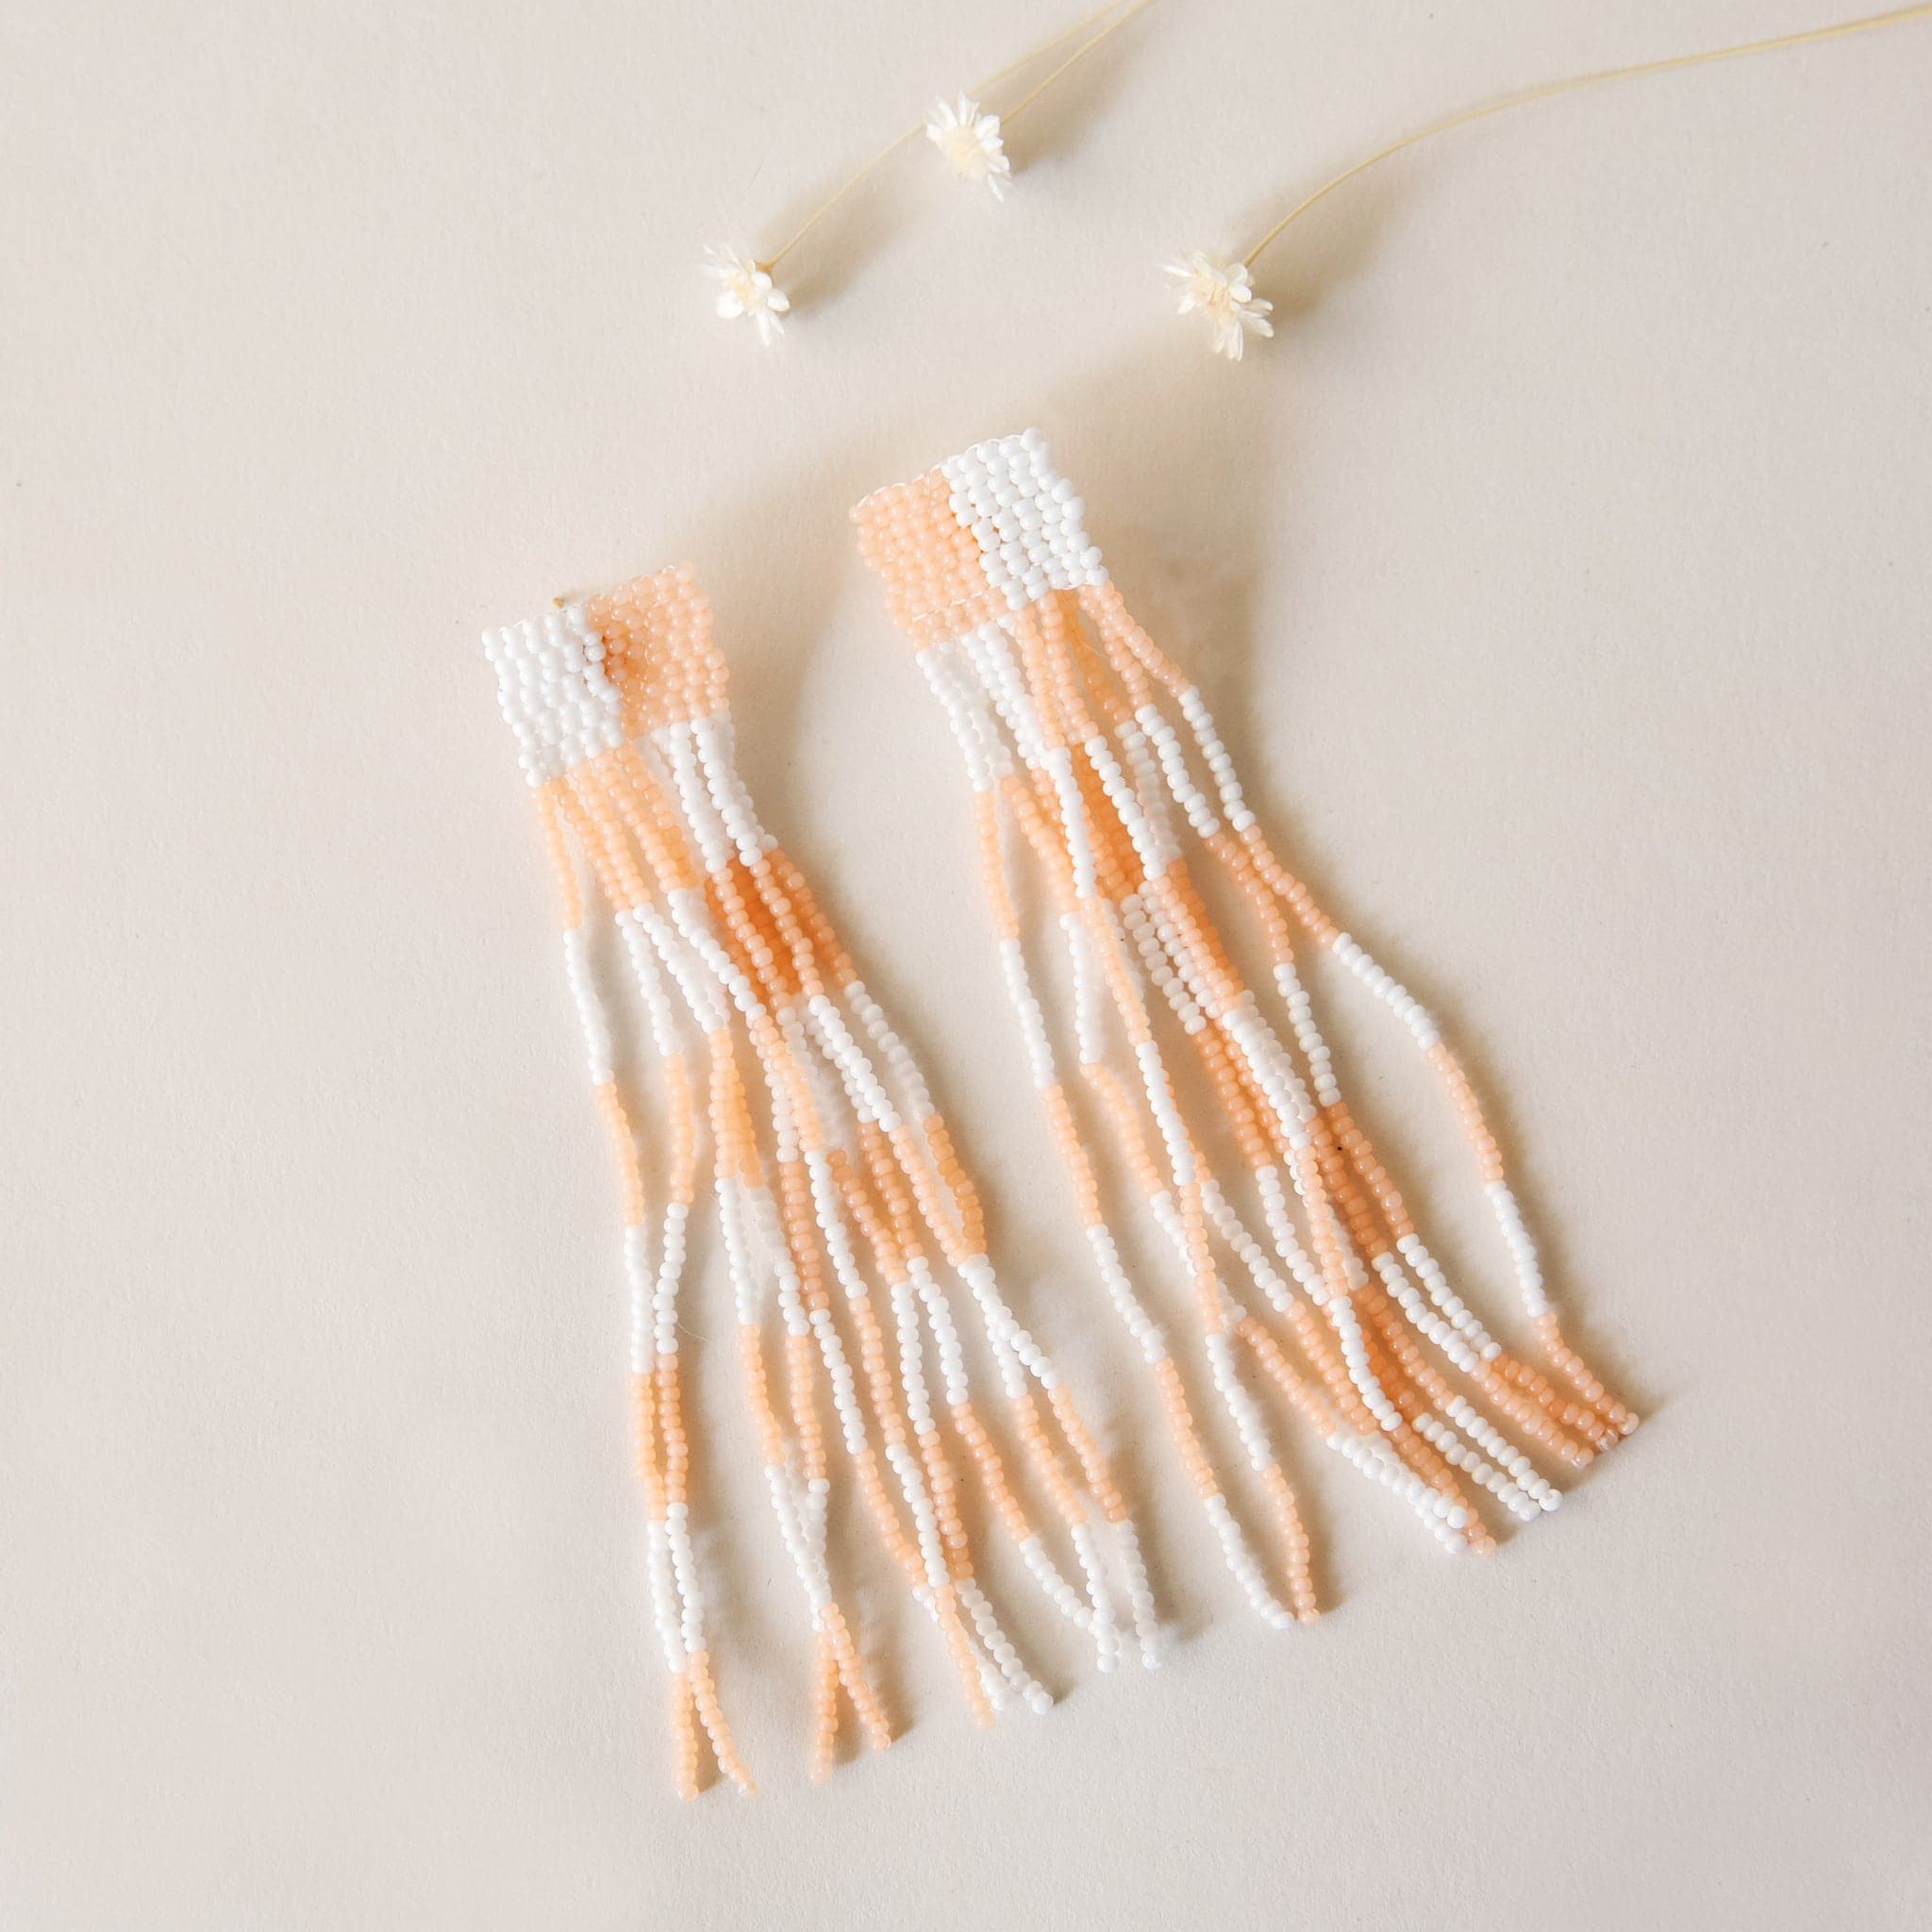 Beaded peach and white earrings with a checker design. They have long dangling beaded strings that make for a fun addition to any outfit.